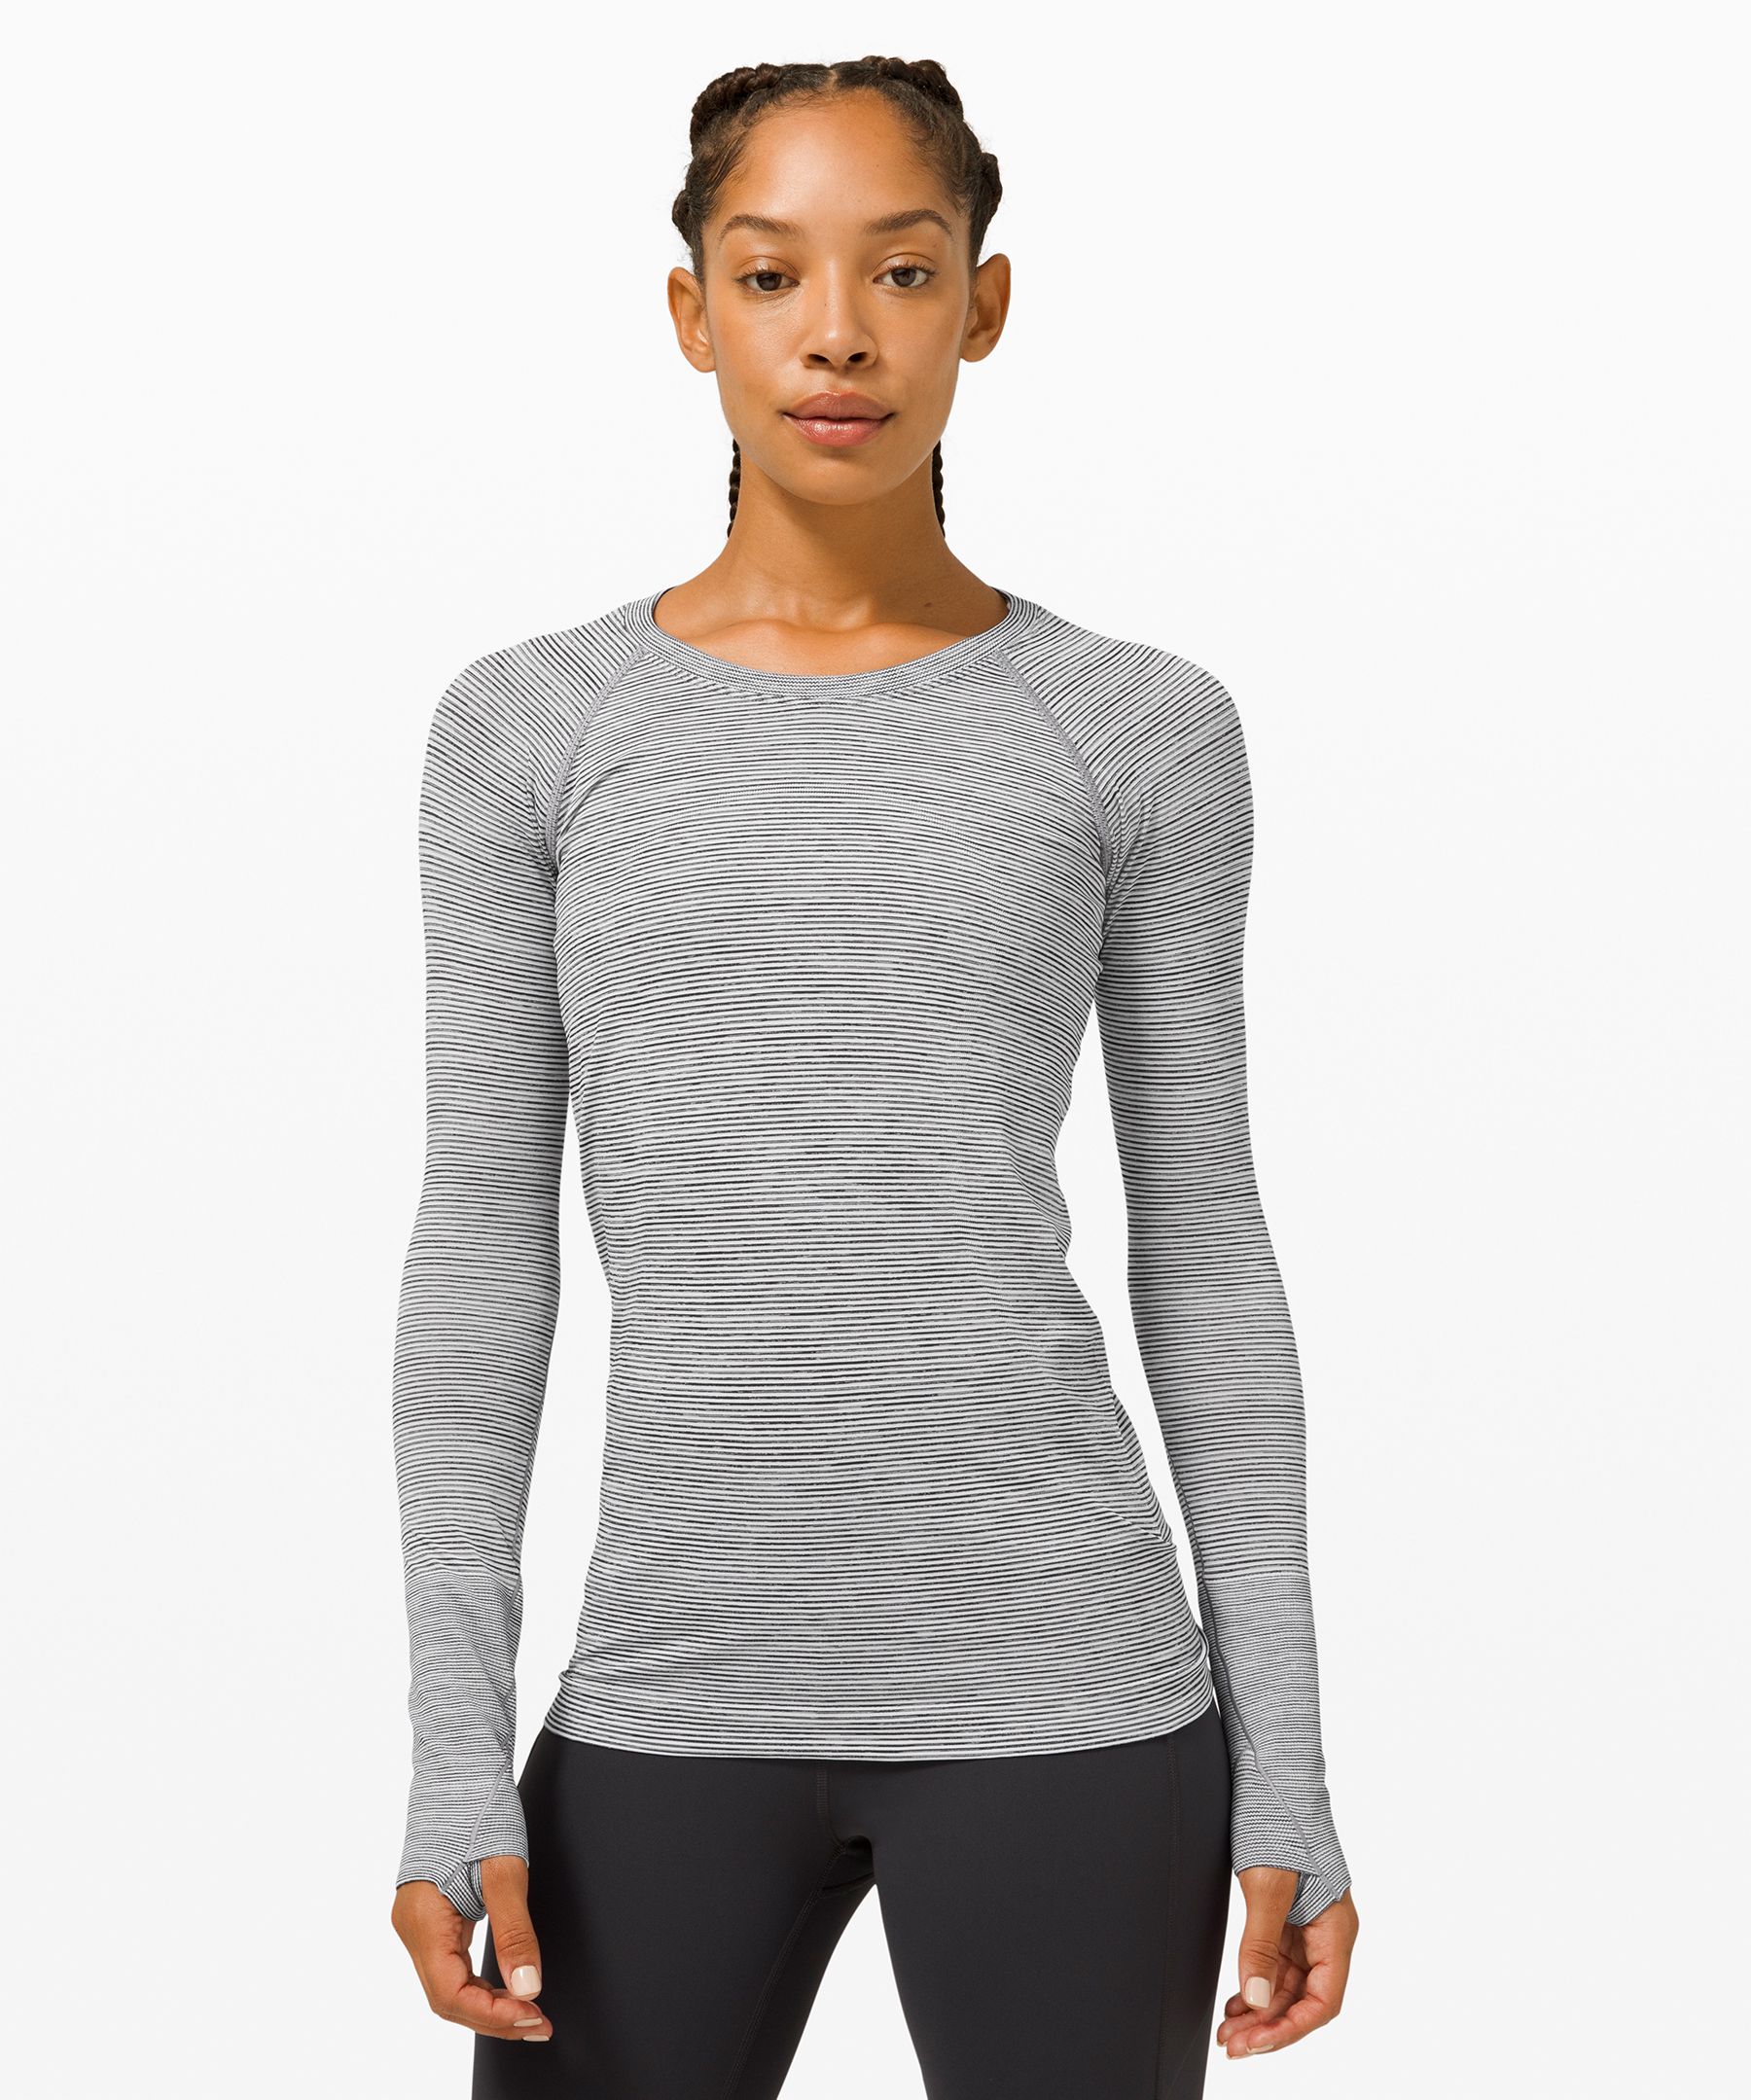 Lululemon Swiftly Tech Long Sleeve Shirt 2.0 In Wee Are From Space White